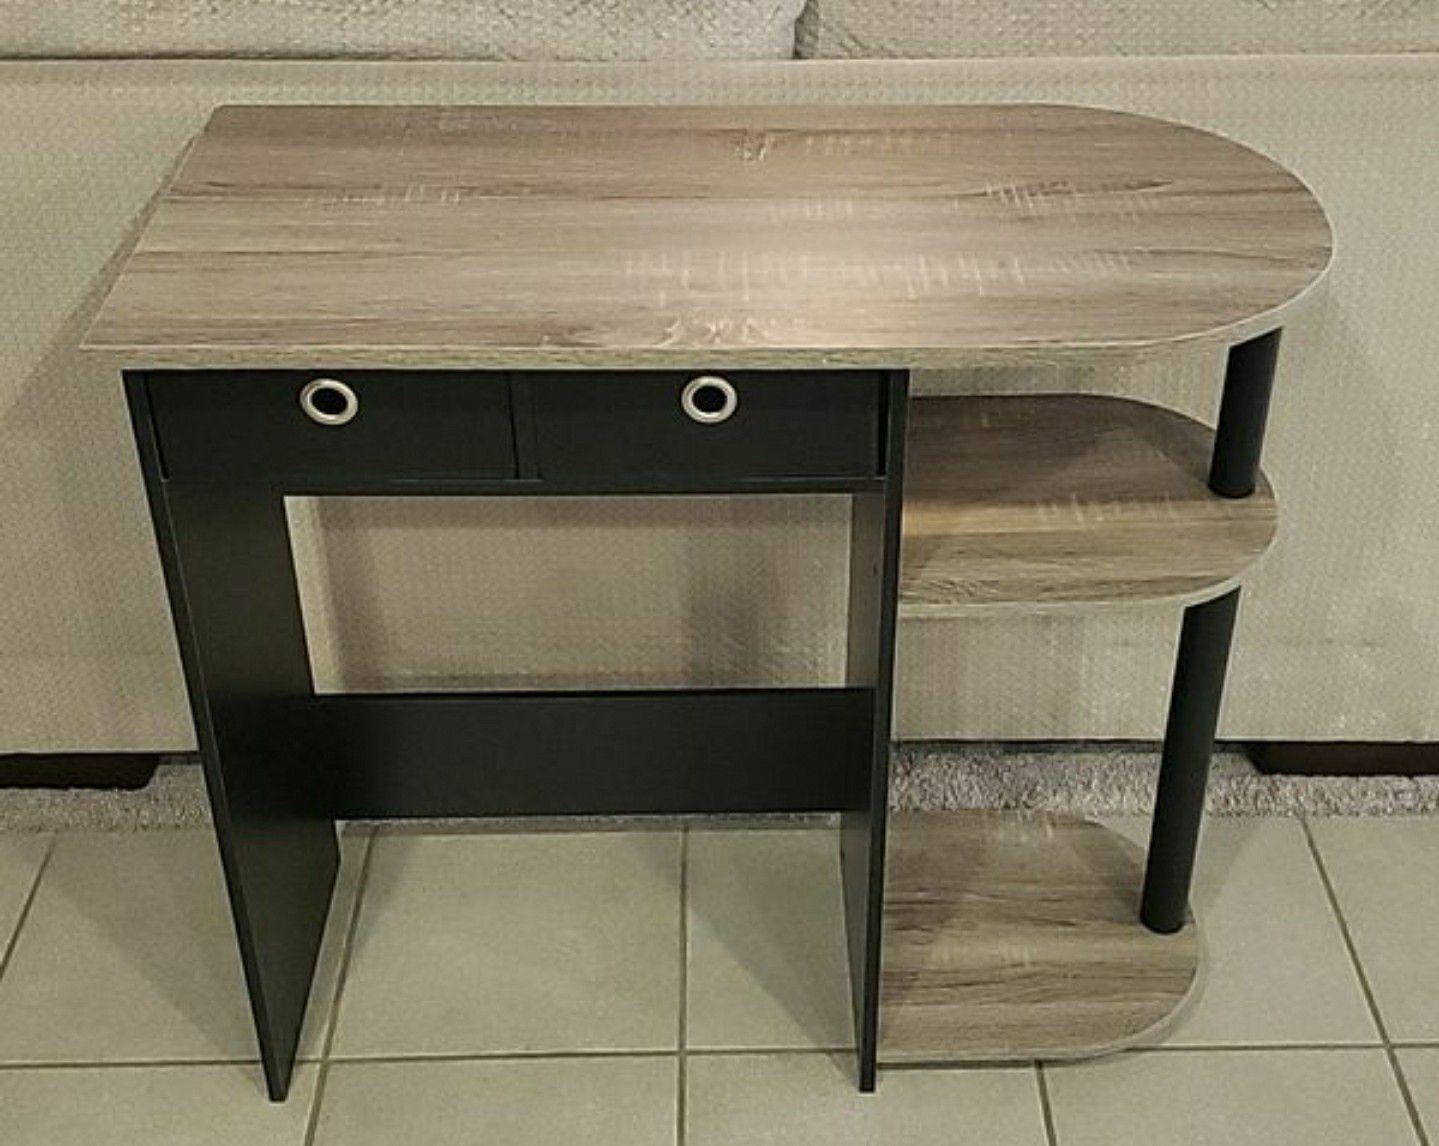 New Grey & Black Desk with Shelving and Storage Bins